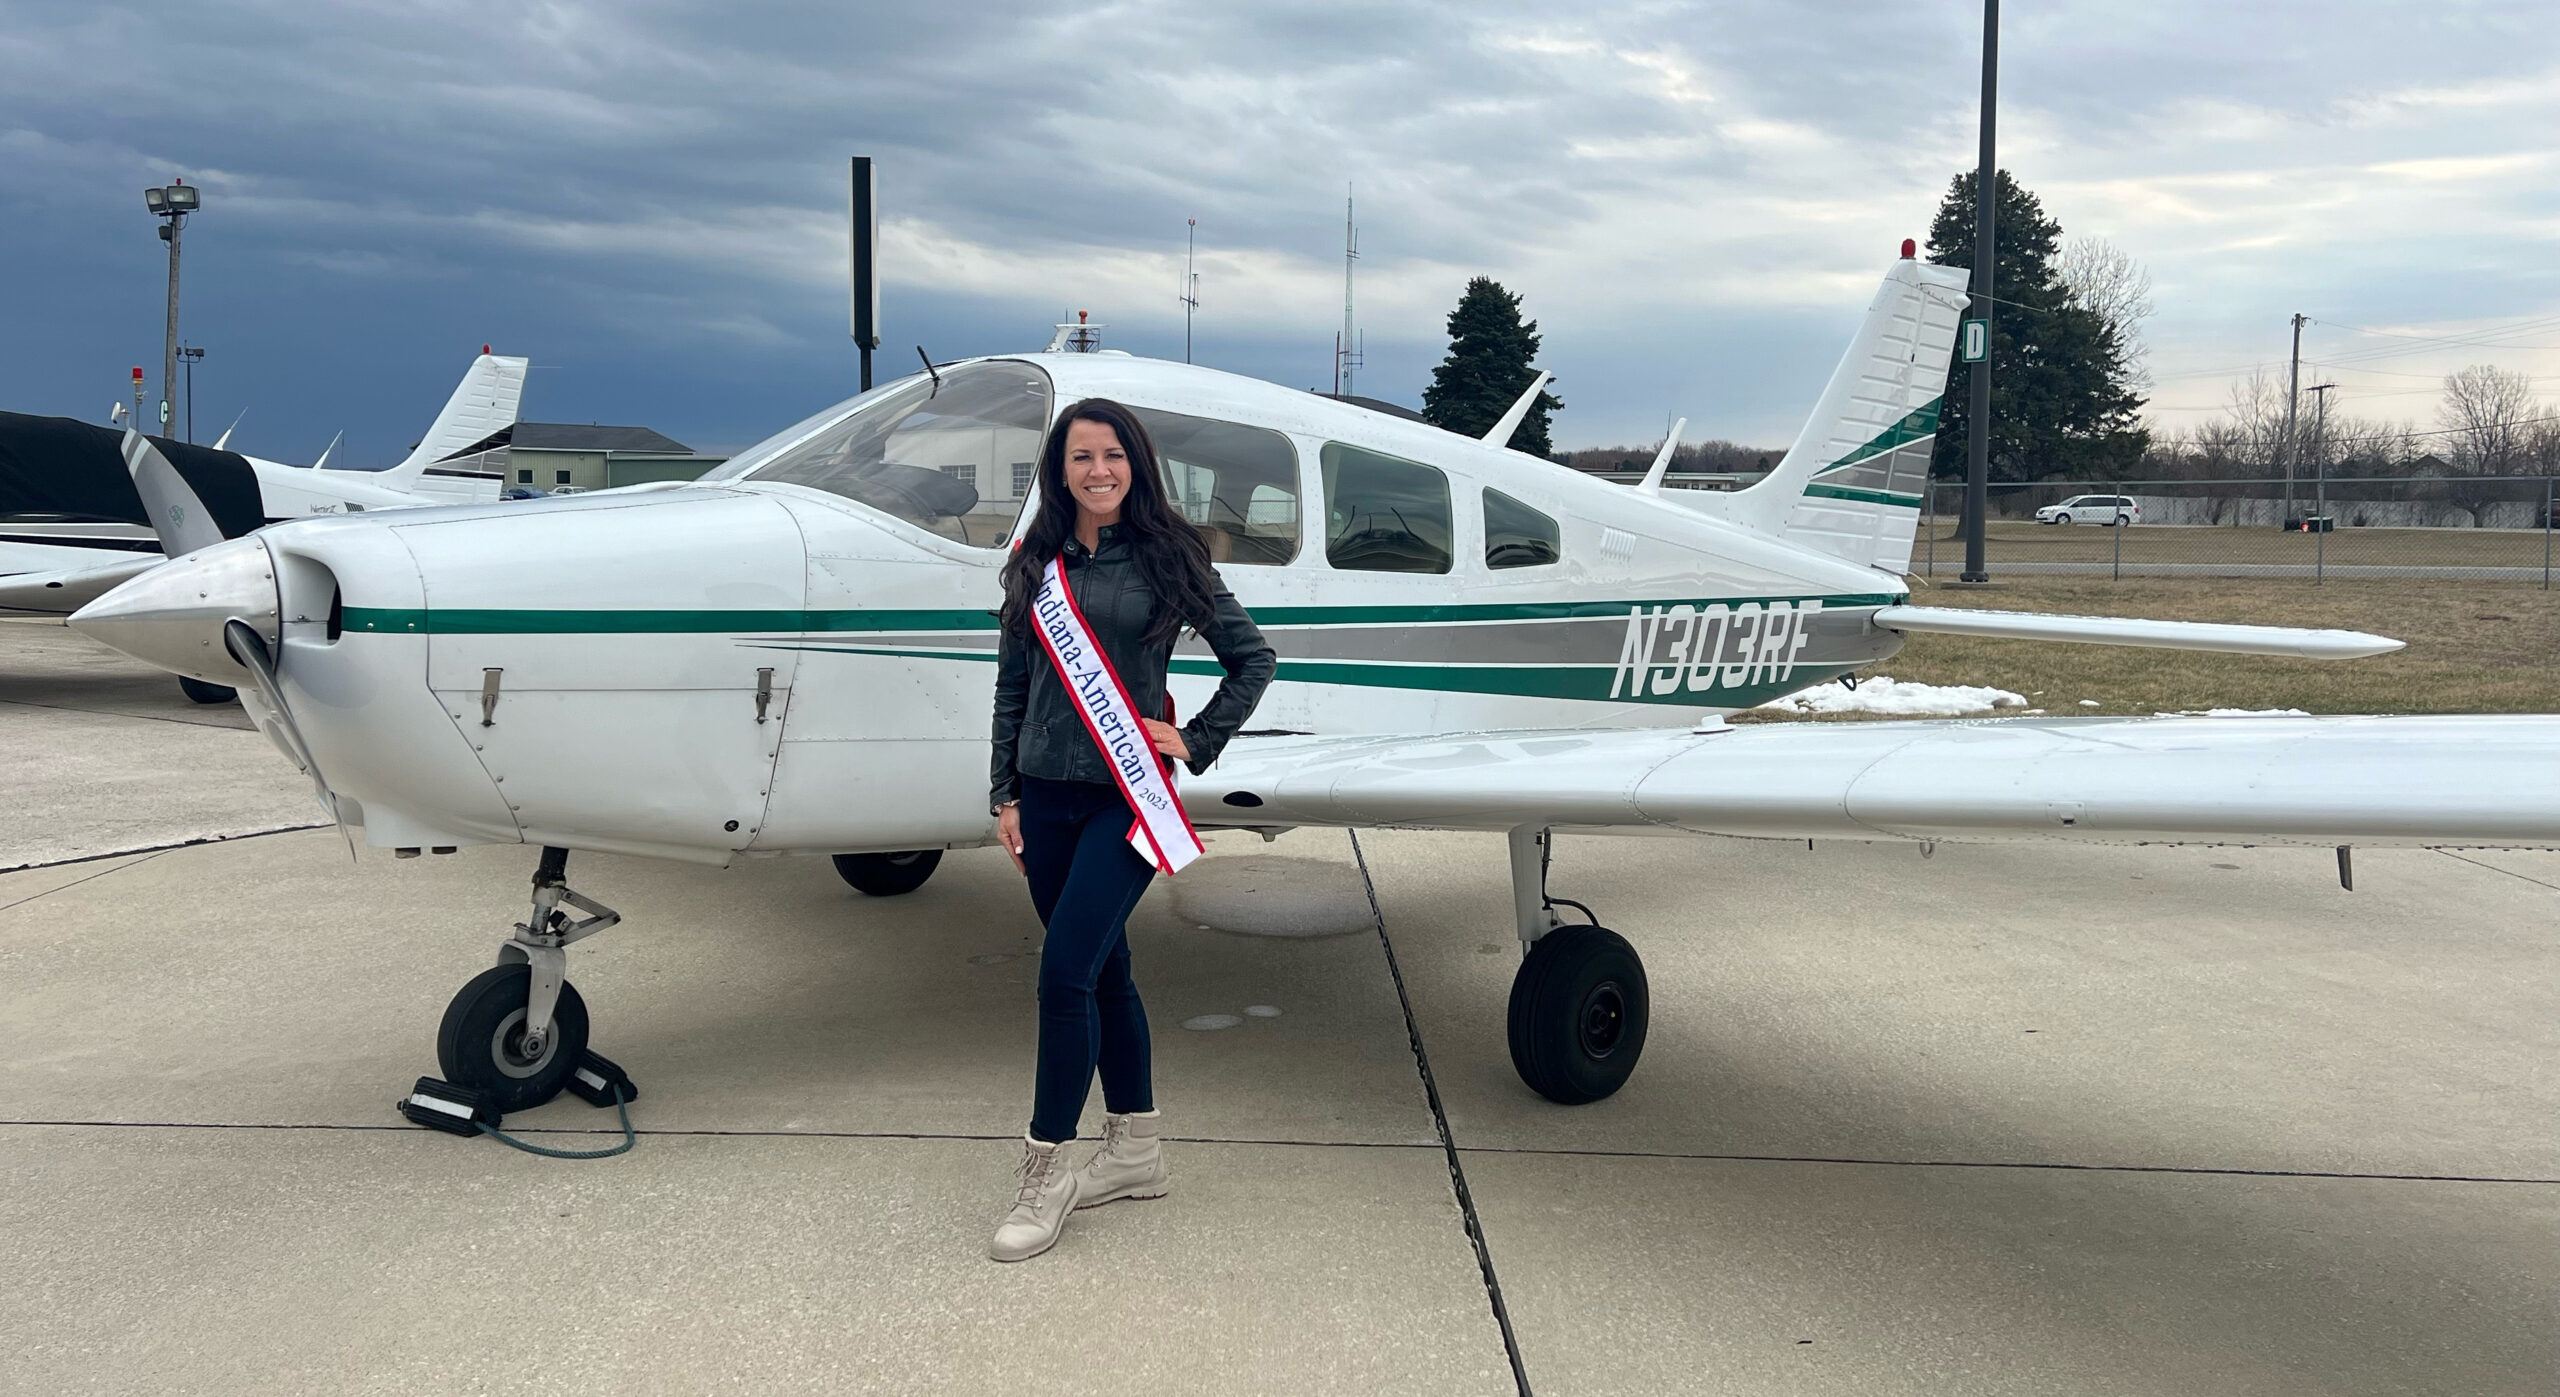 Ashley Cosme Mrs Indiana-American 2023 in front of small plane